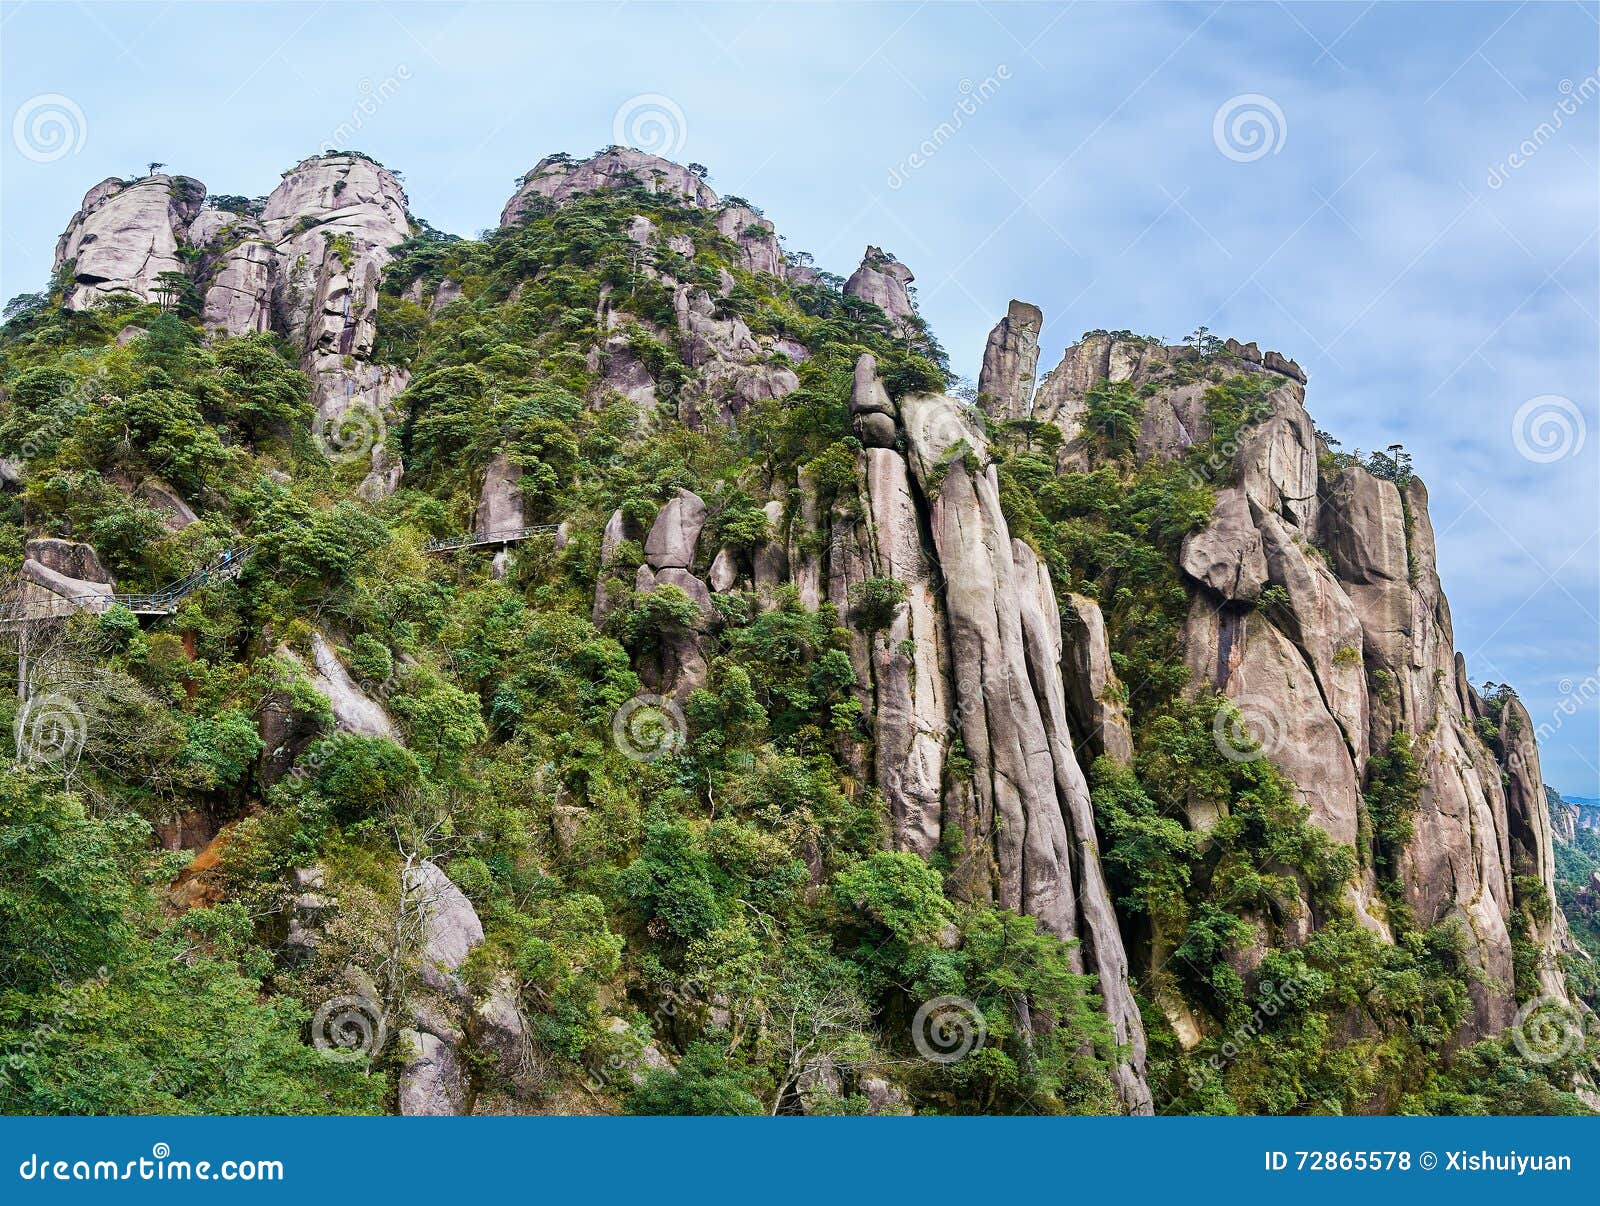 The trees on the peaks stock photo. Image of heritage - 72865578